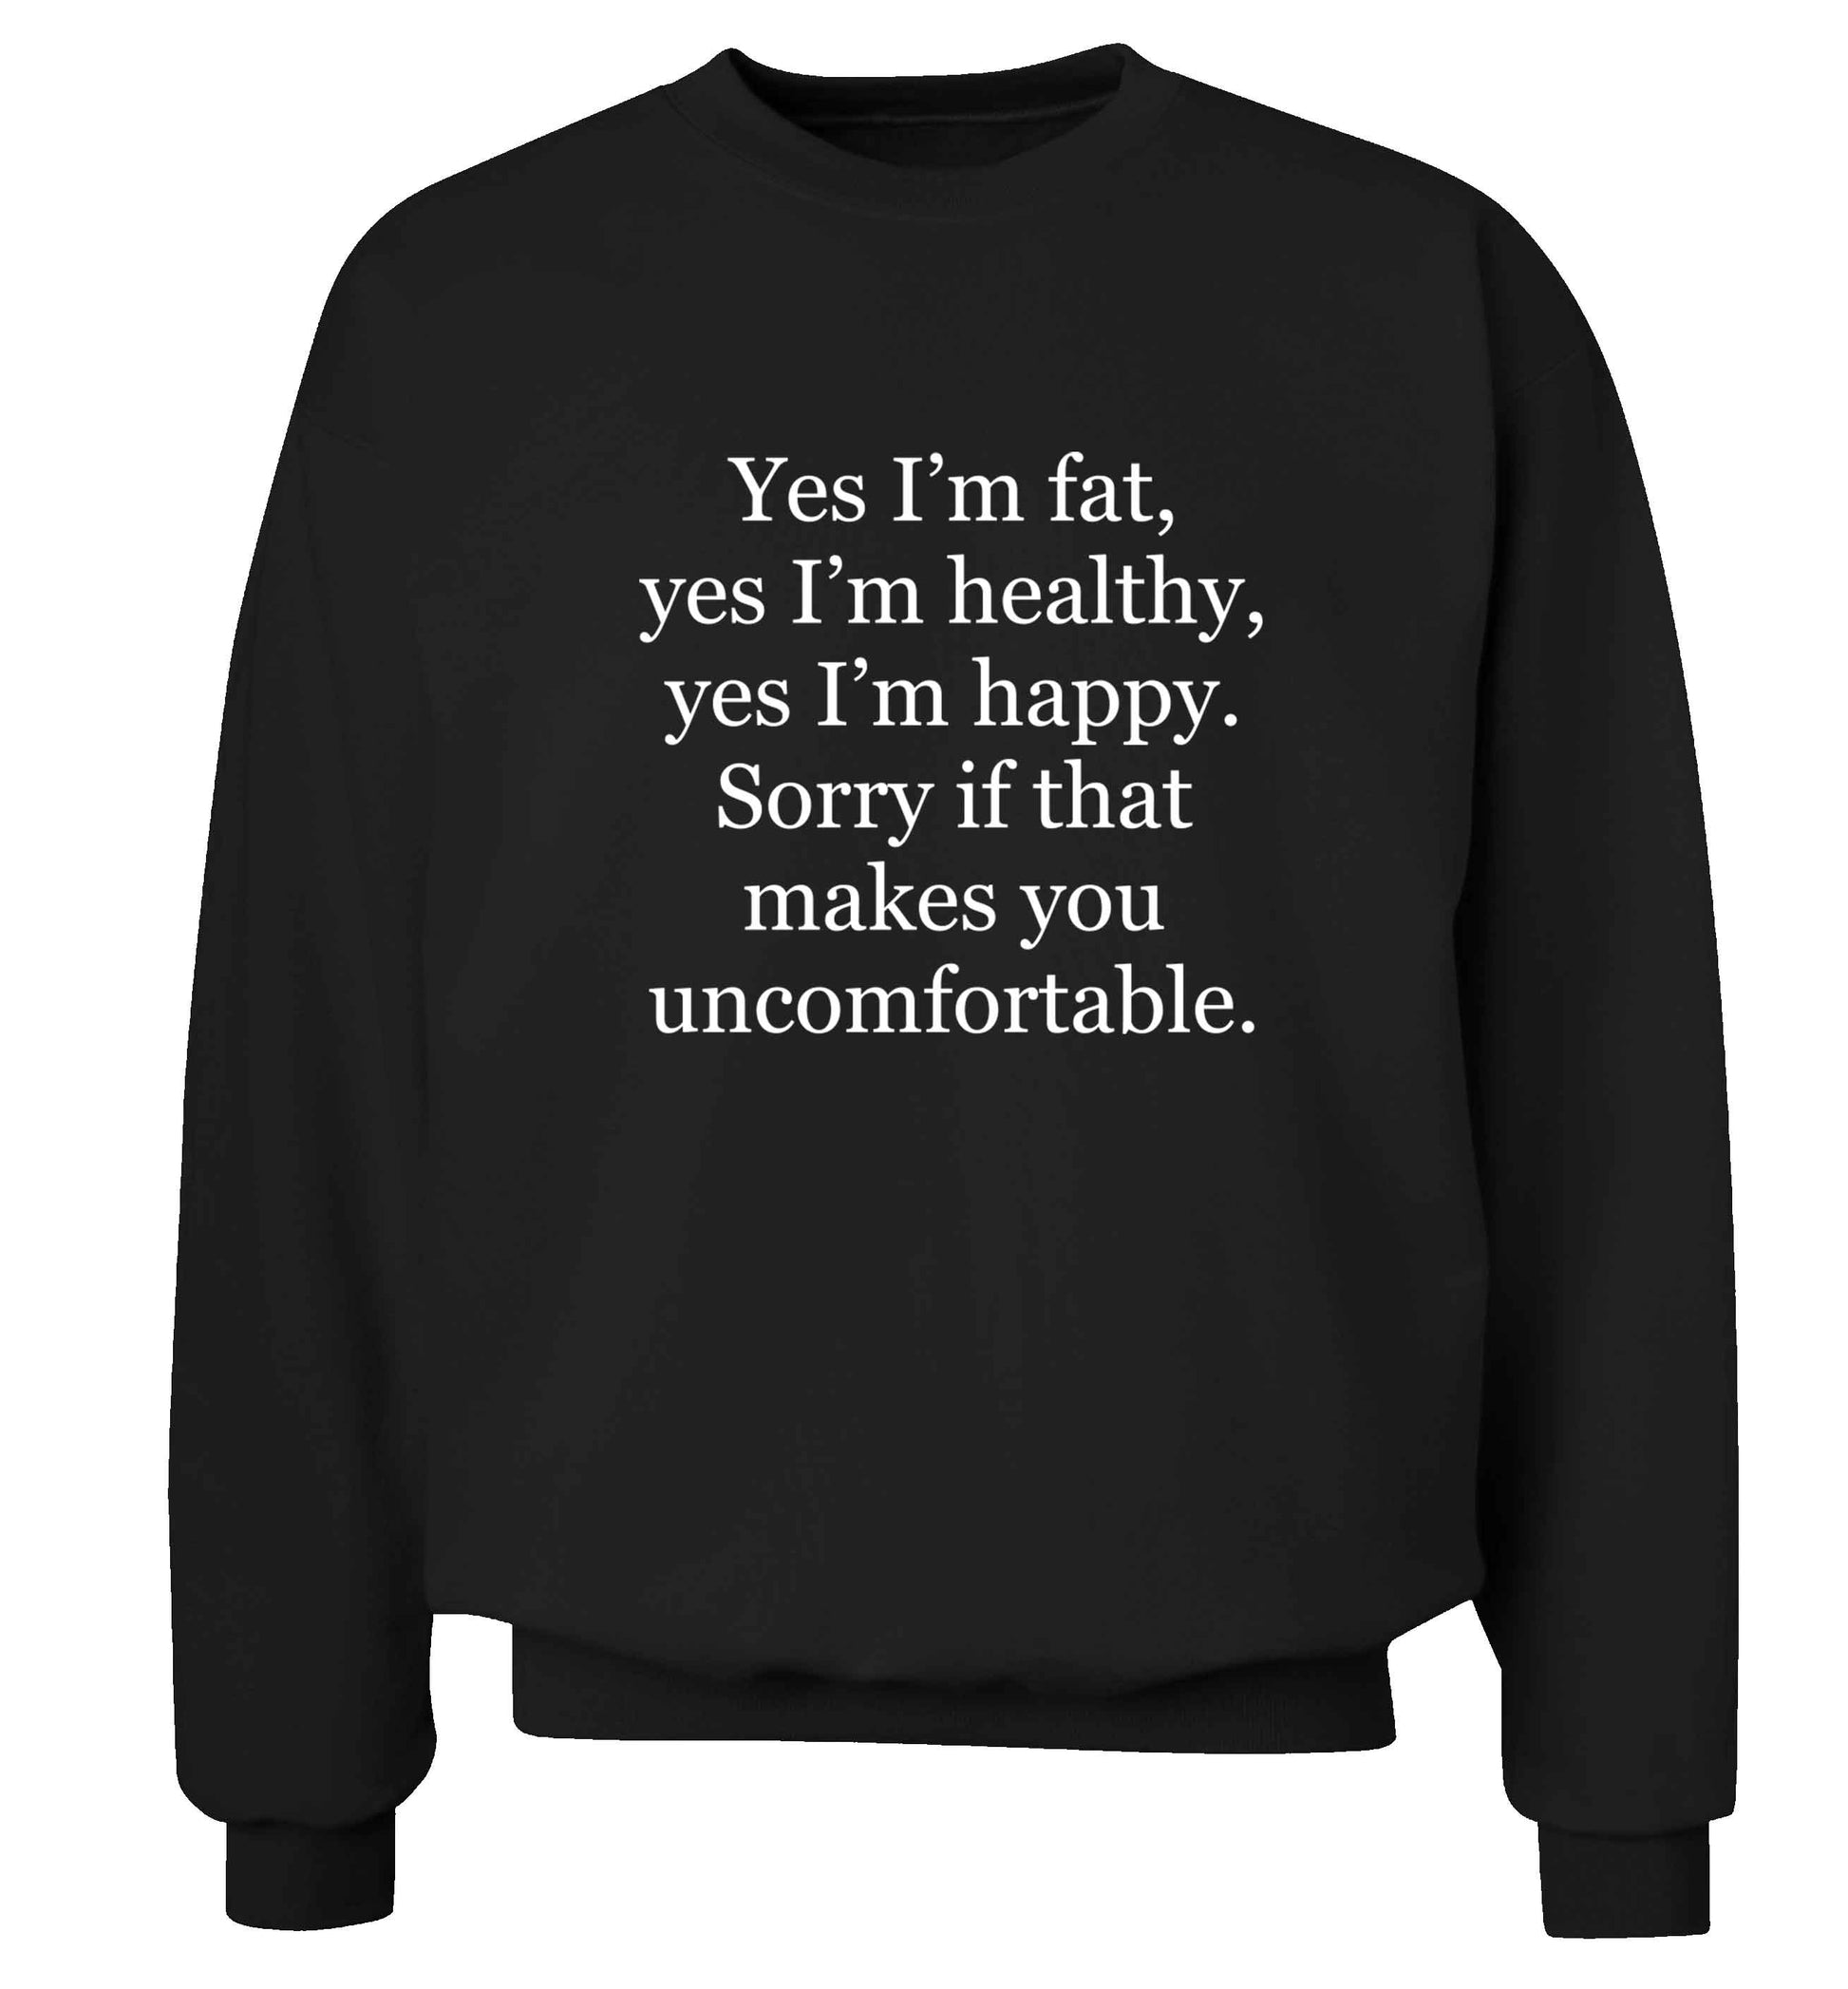 Yes I'm fat, yes I'm healthy, yes I'm happy. Sorry if that makes you uncomfortable adult's unisex black sweater 2XL